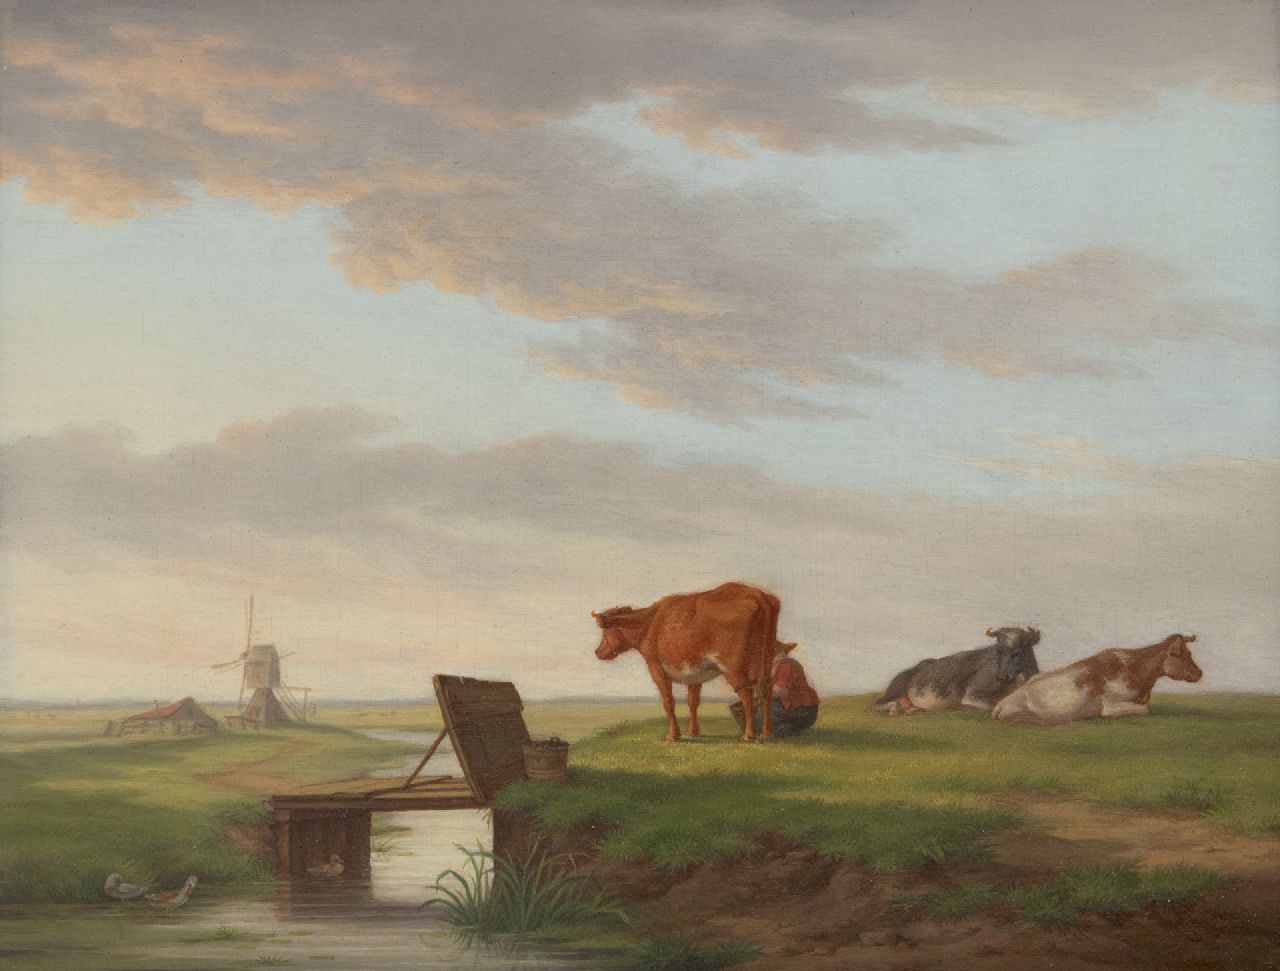 Burgh H.A. van der | Hendrik Adam van der Burgh | Paintings offered for sale | Cows in a landscape with a mill, oil on panel 20.4 x 26.3 cm, signed l.r. and dated 1821